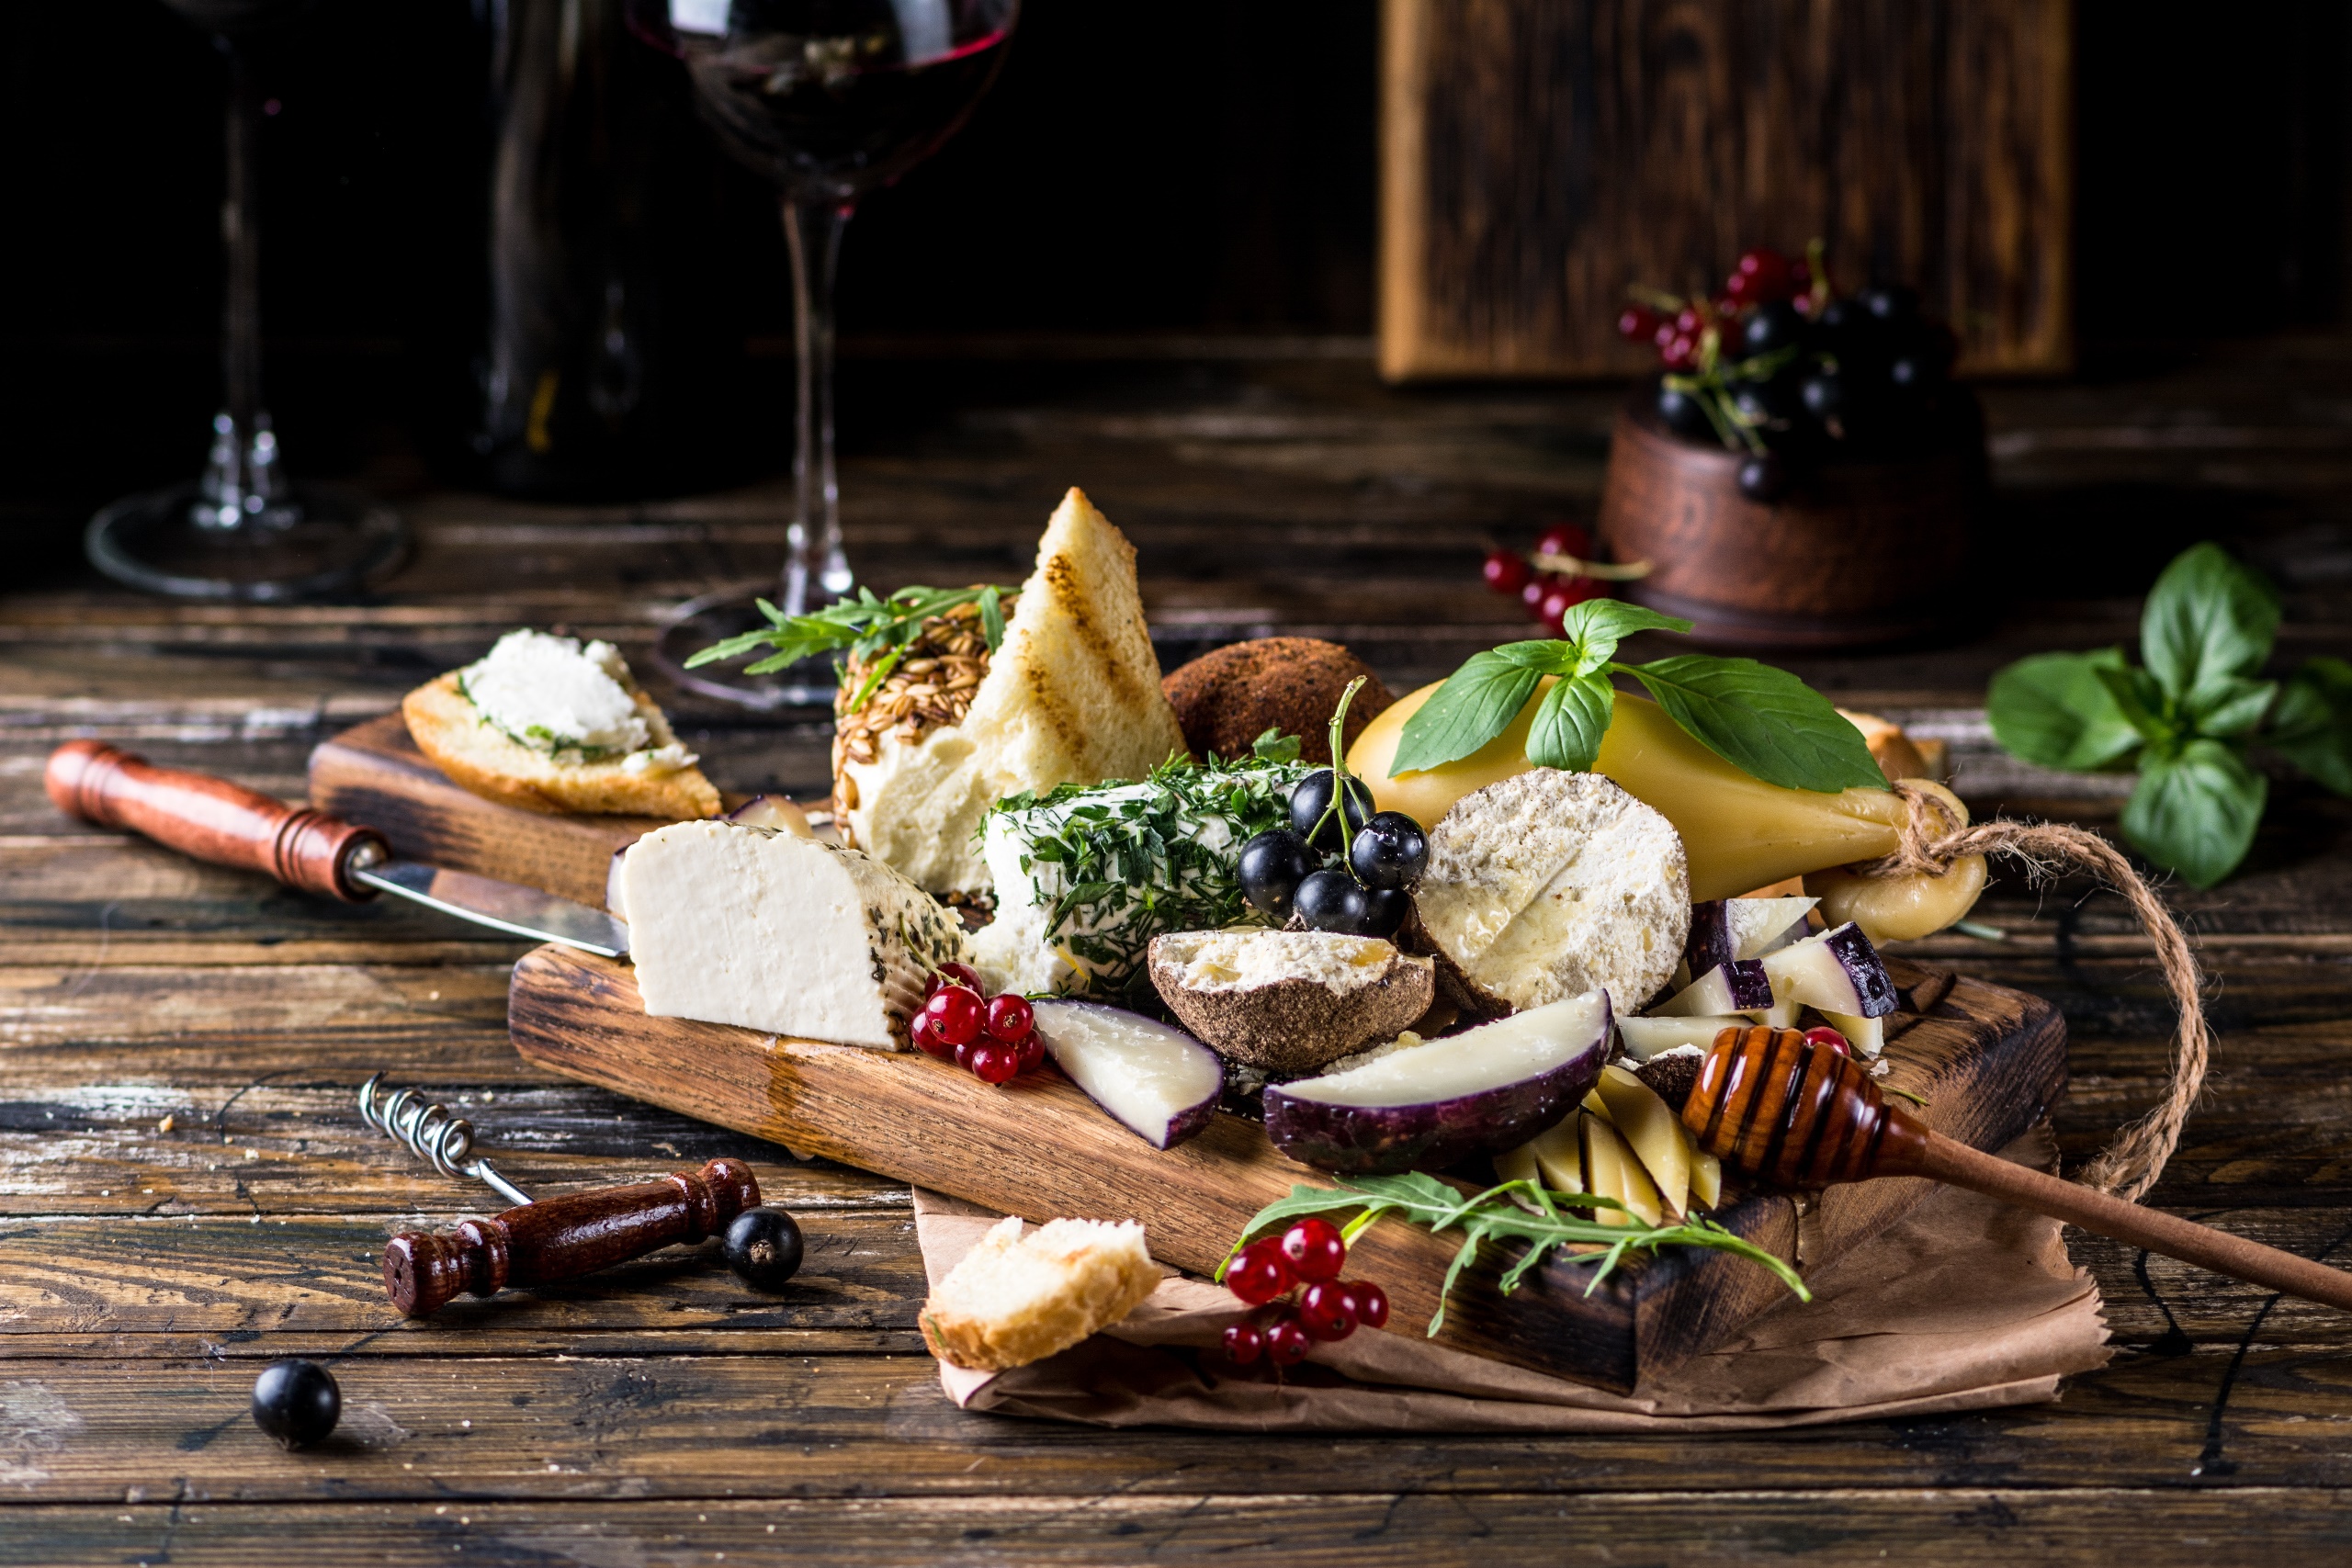 General 2560x1707 food still life cheese fruit berries grapes basil red currant bread honey knife cutting board wooden surface wine drinking glass